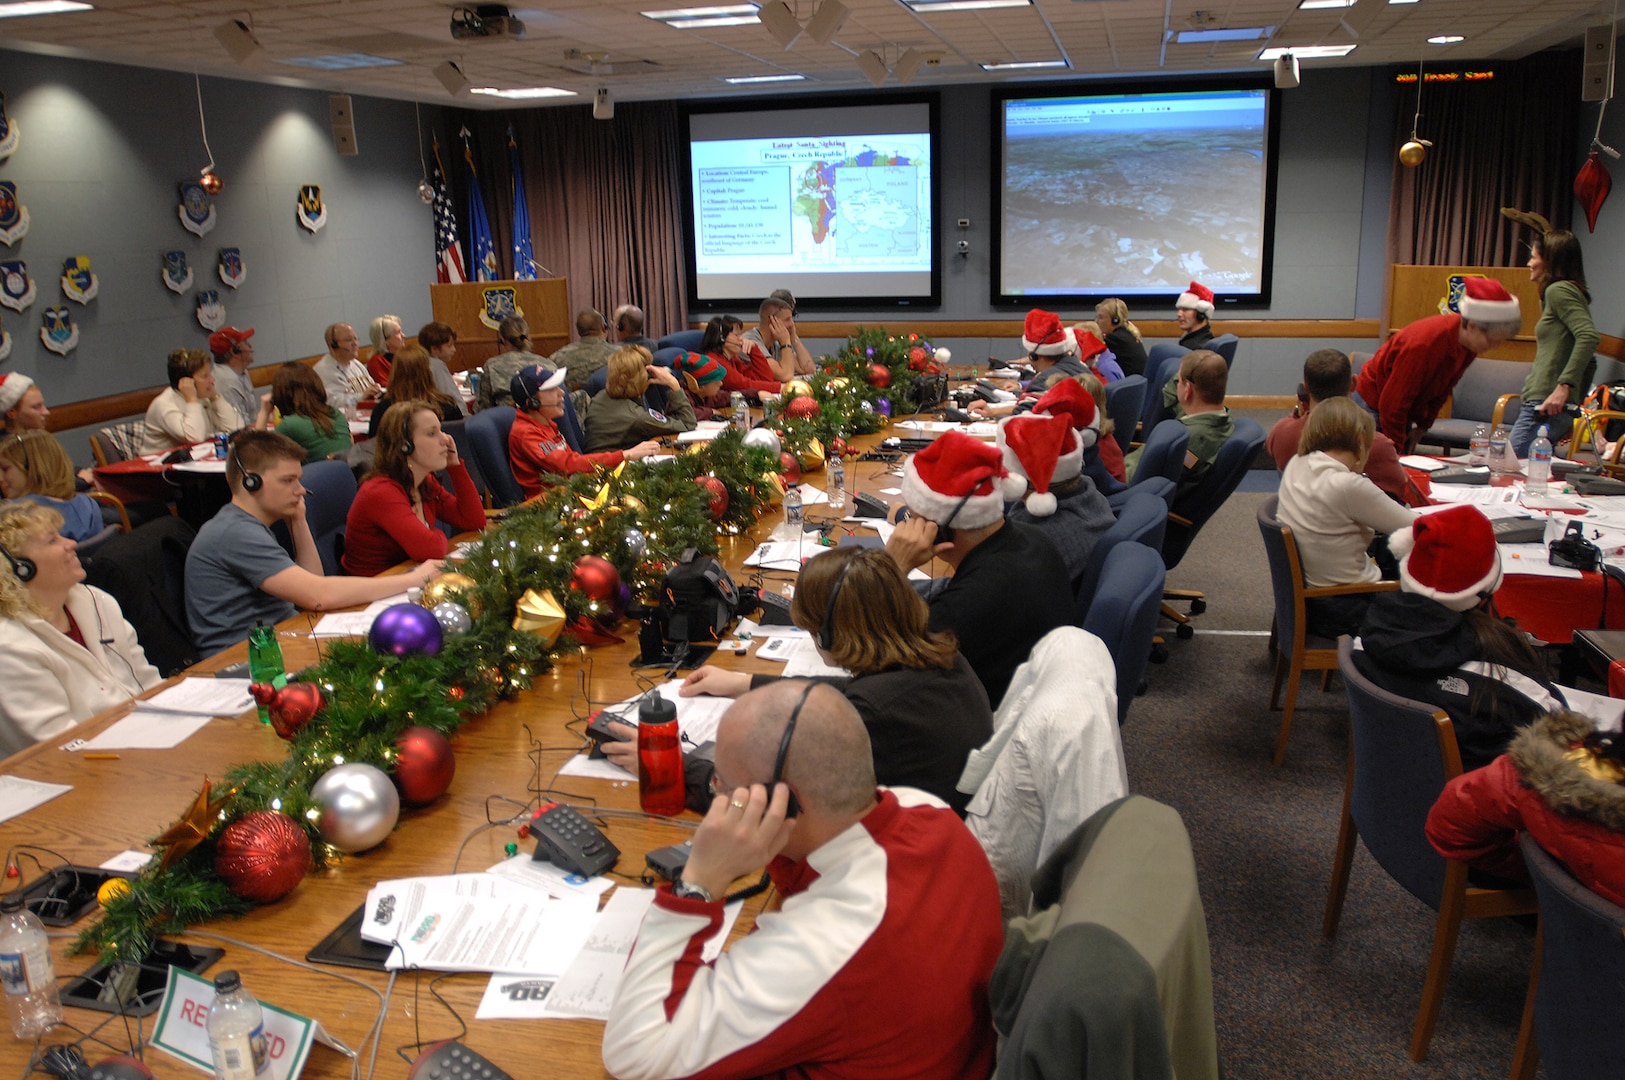 More than 1,000 military and civilian volunteers answered nearly 95,000 telephone calls and more than 10,000 e-mails at the NORAD Tracks Santa Operations Center on Christmas Eve at Peterson Air Force Base, Colo. Photo by Sgt. 1st Class Gail Braymen 